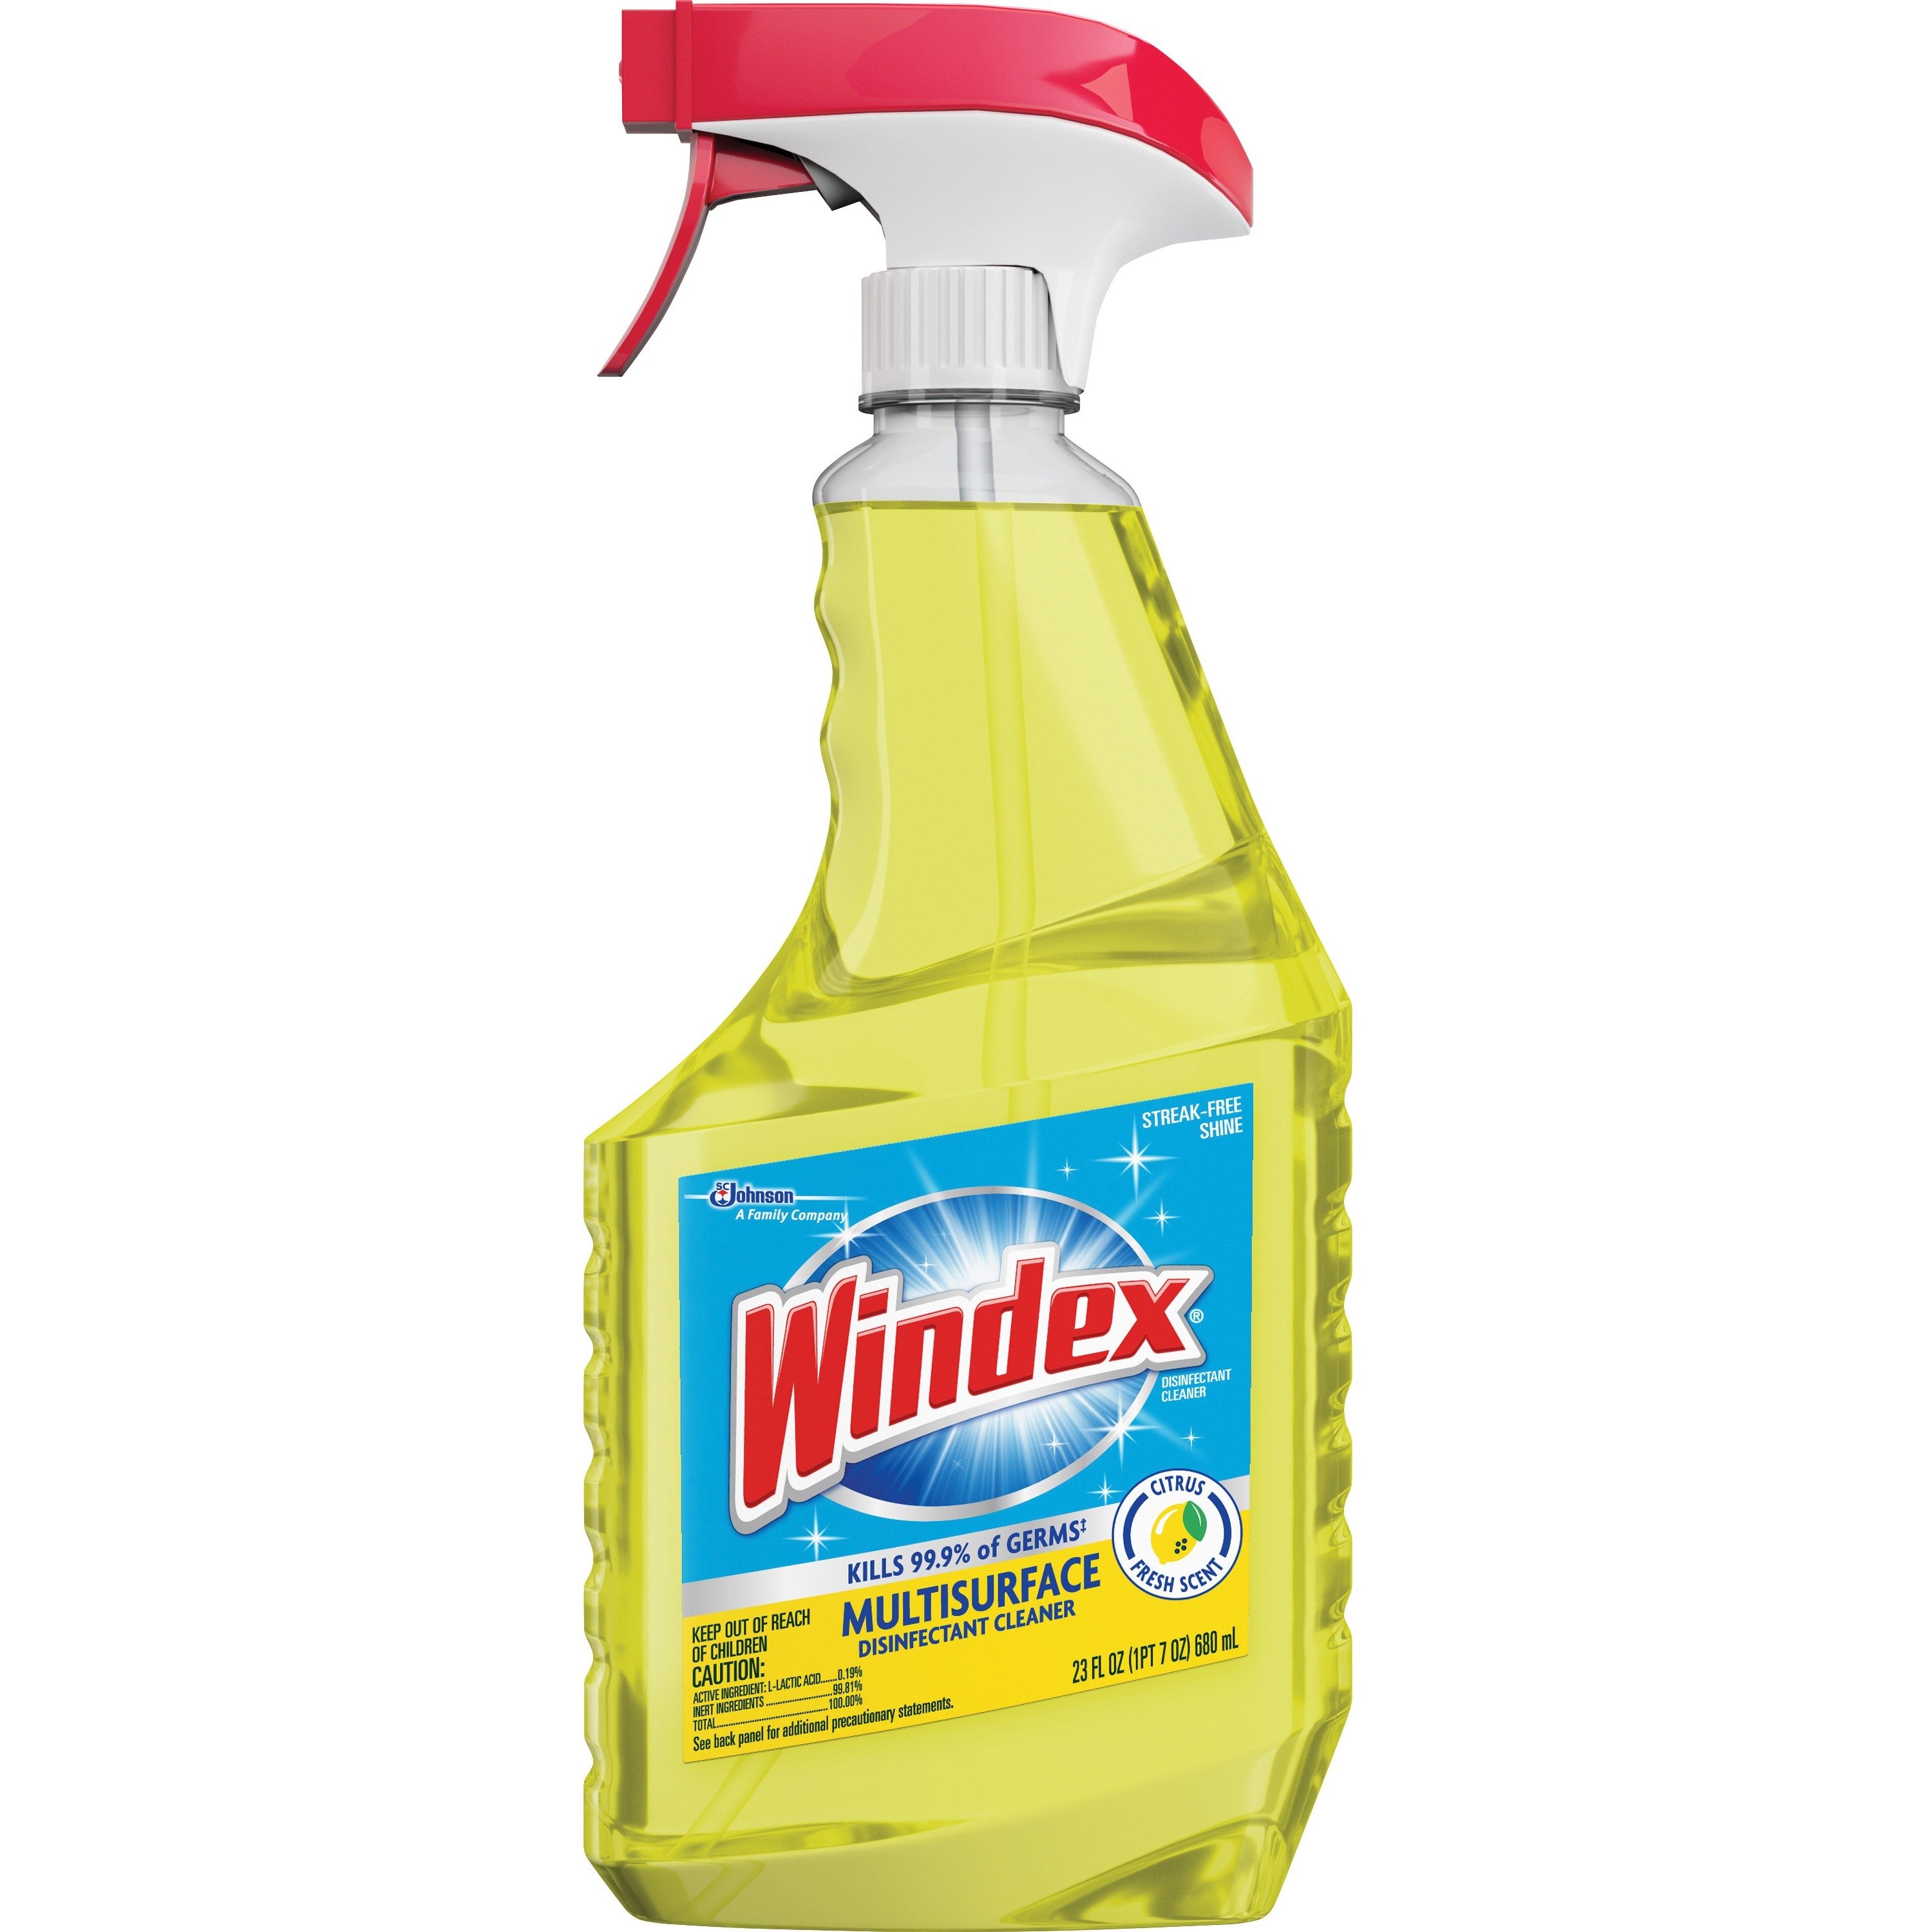 ON SALE!  Windex MultiSurface Disinfectant Spray